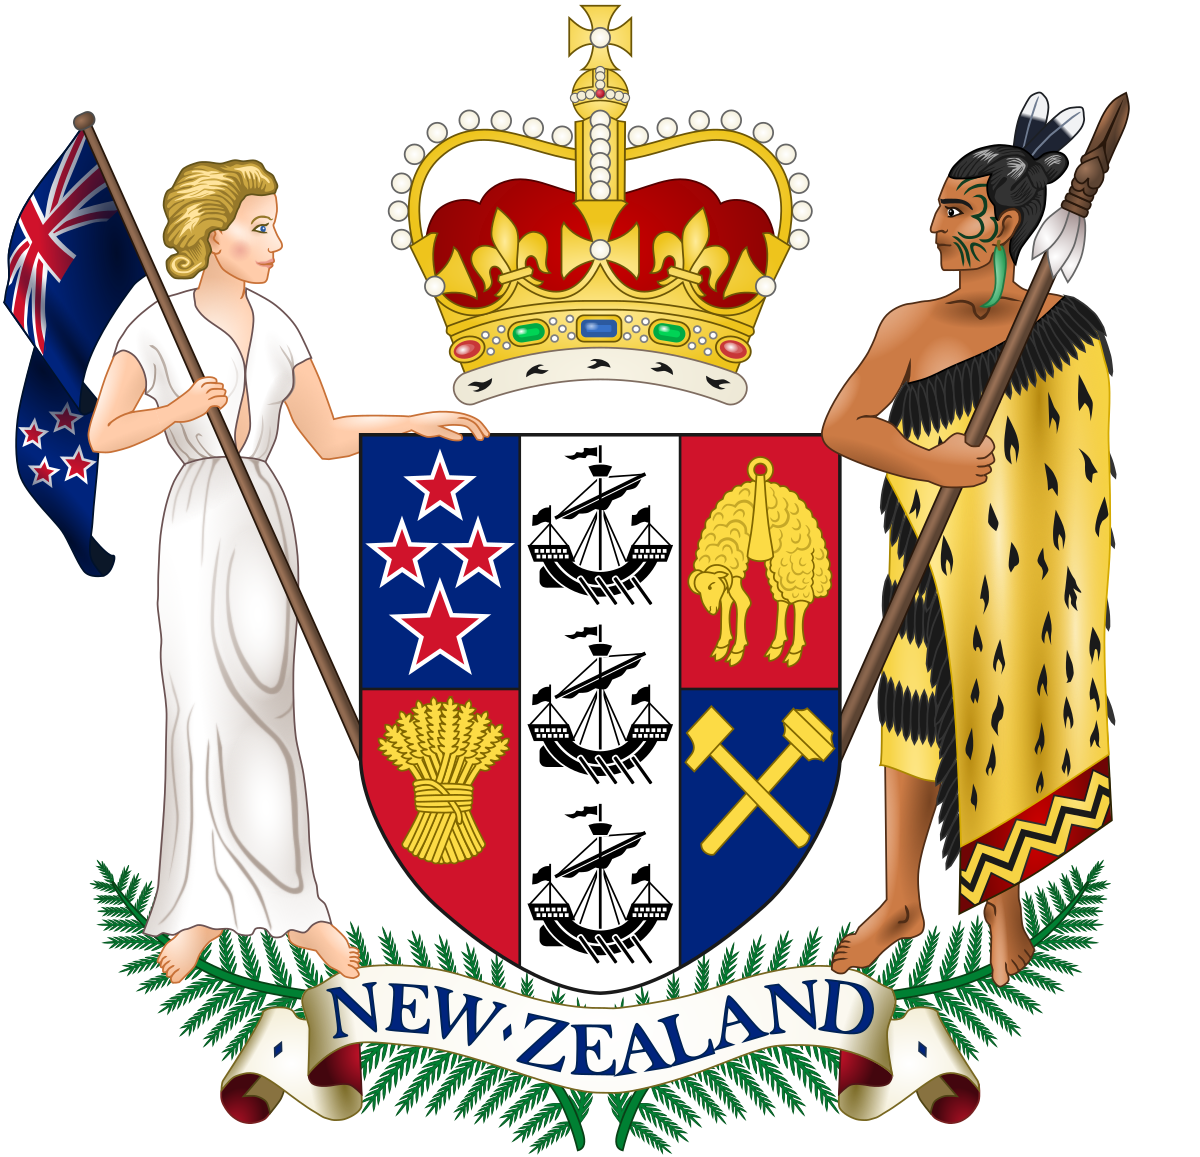 realm of new zealand